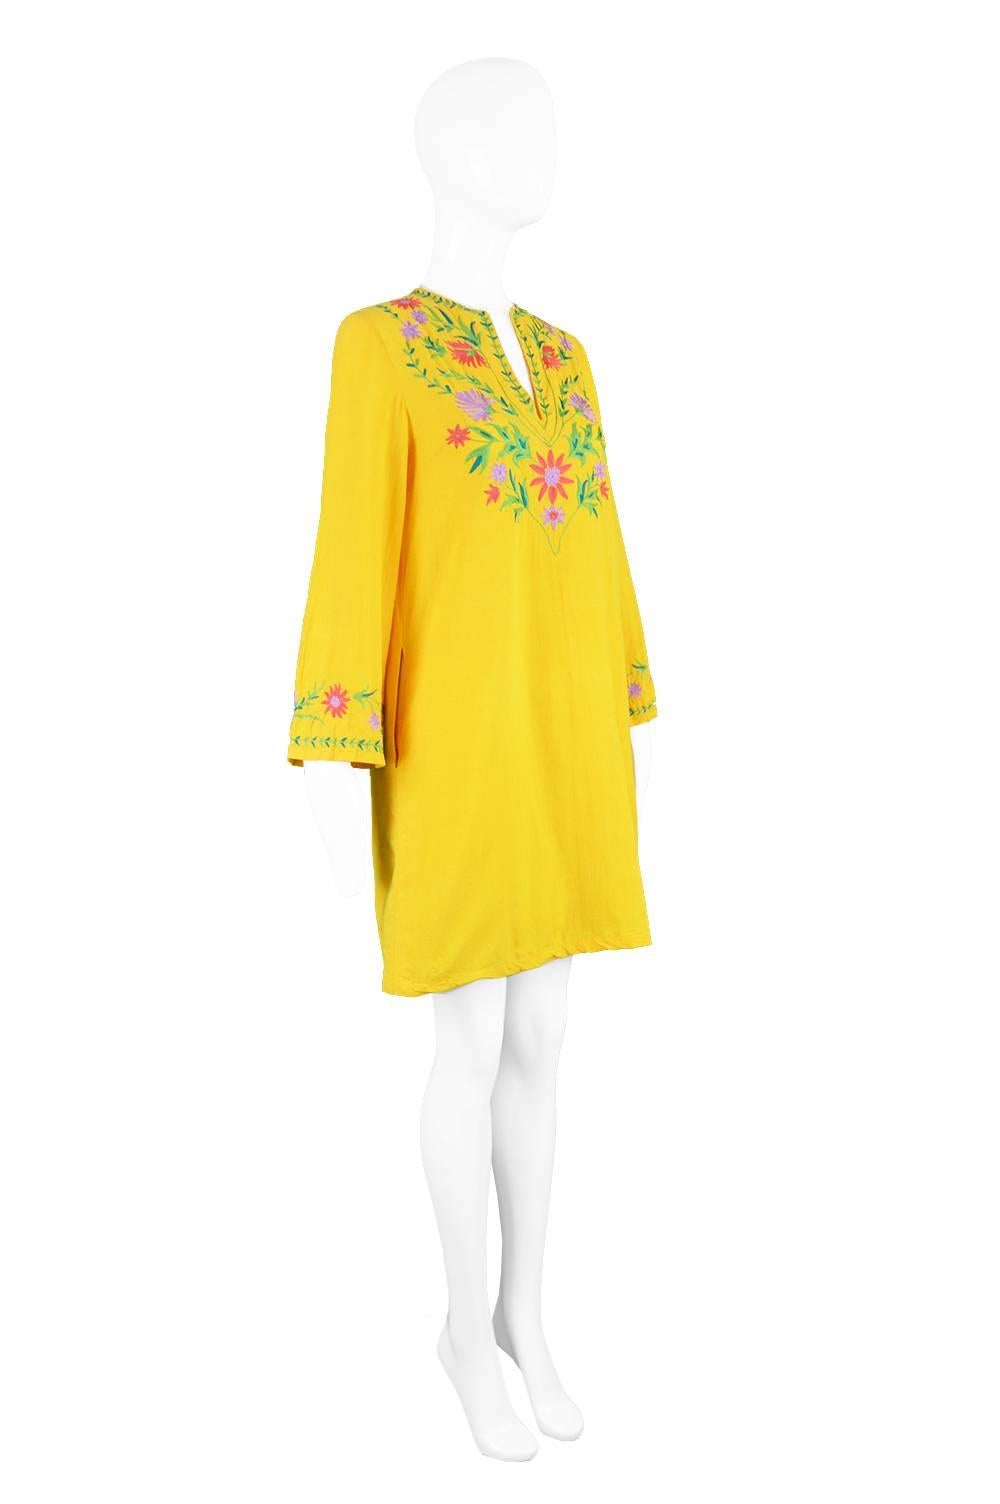 Treacy Lowe Mustard Yellow Hand Embroidered Indian Cotton Mini Dress, 1970s For Sale 2